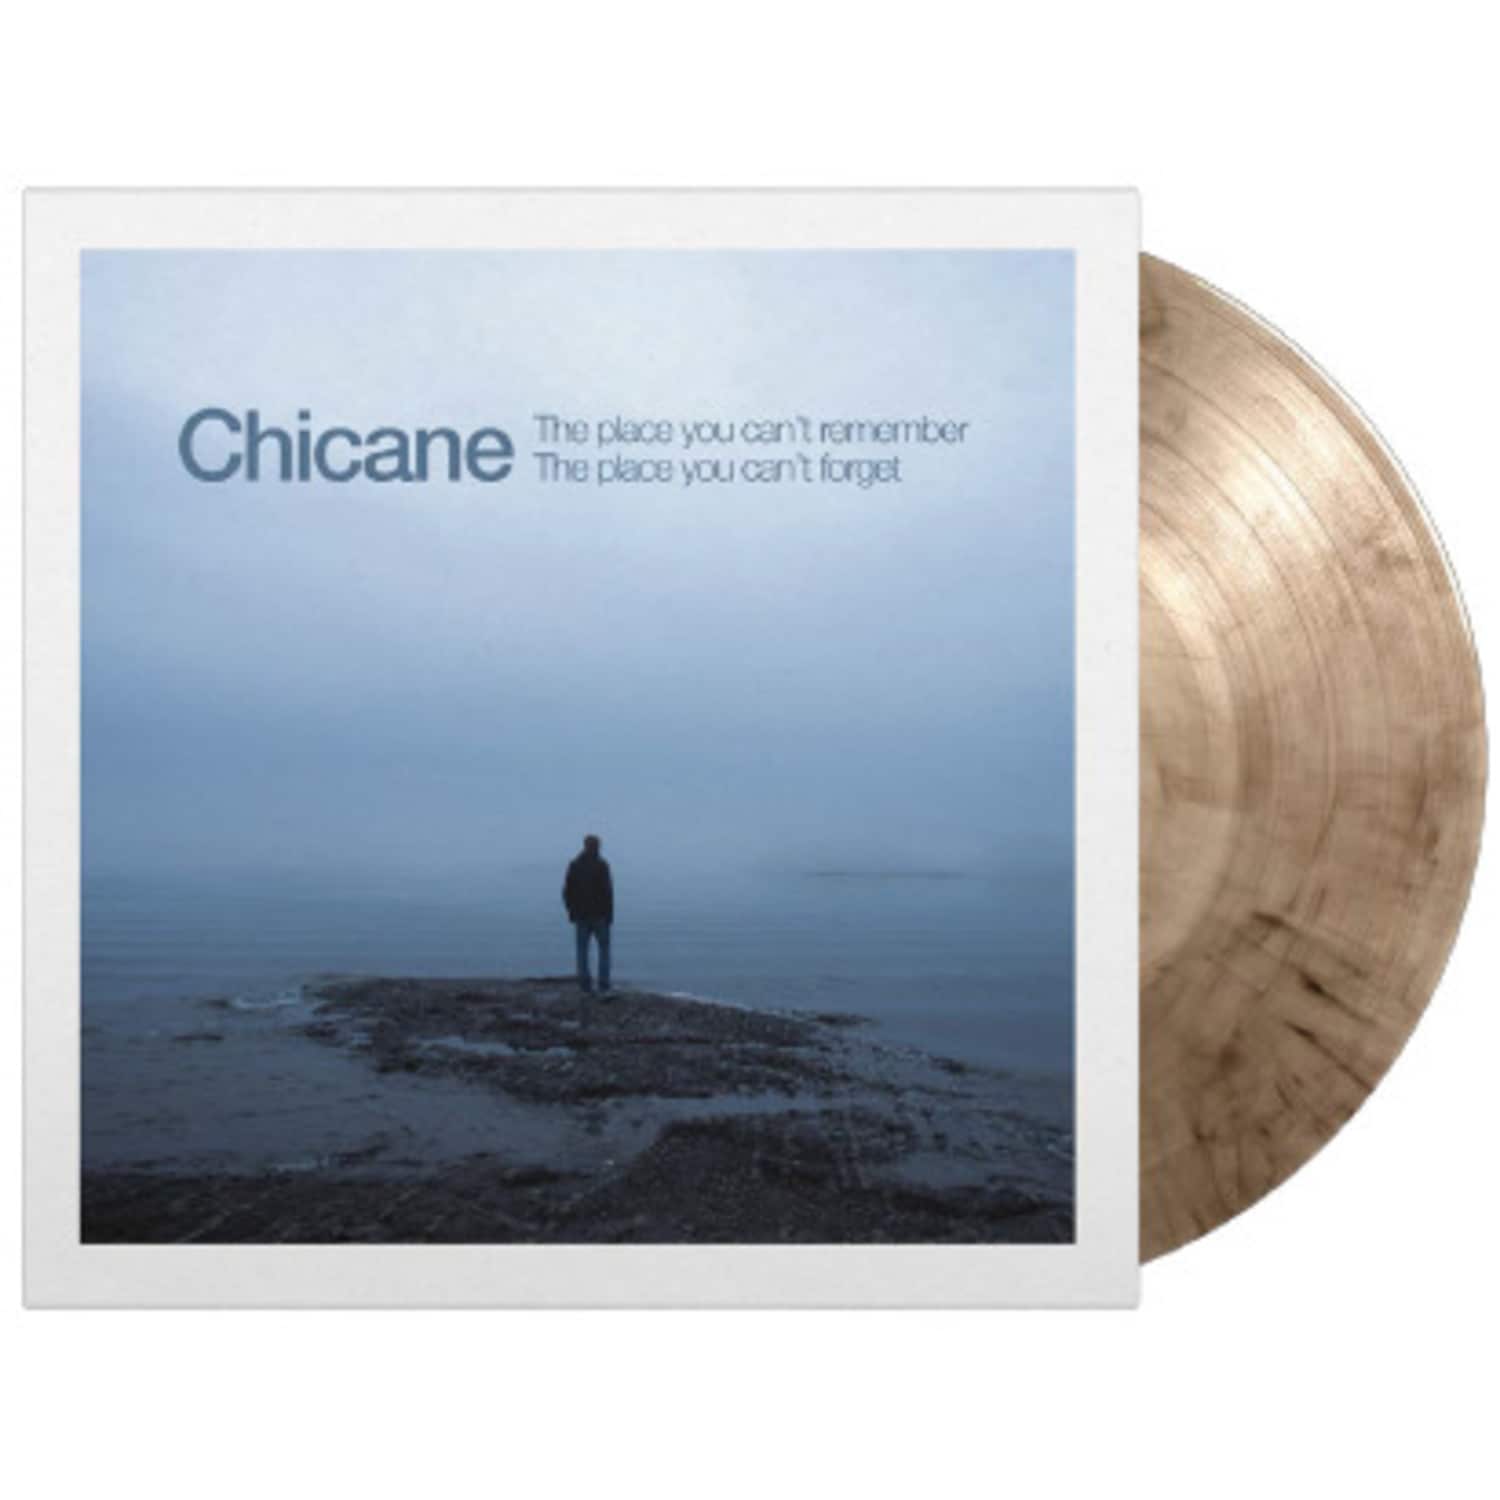 Chicane - PLACE YOU CAN T REMEMBER 